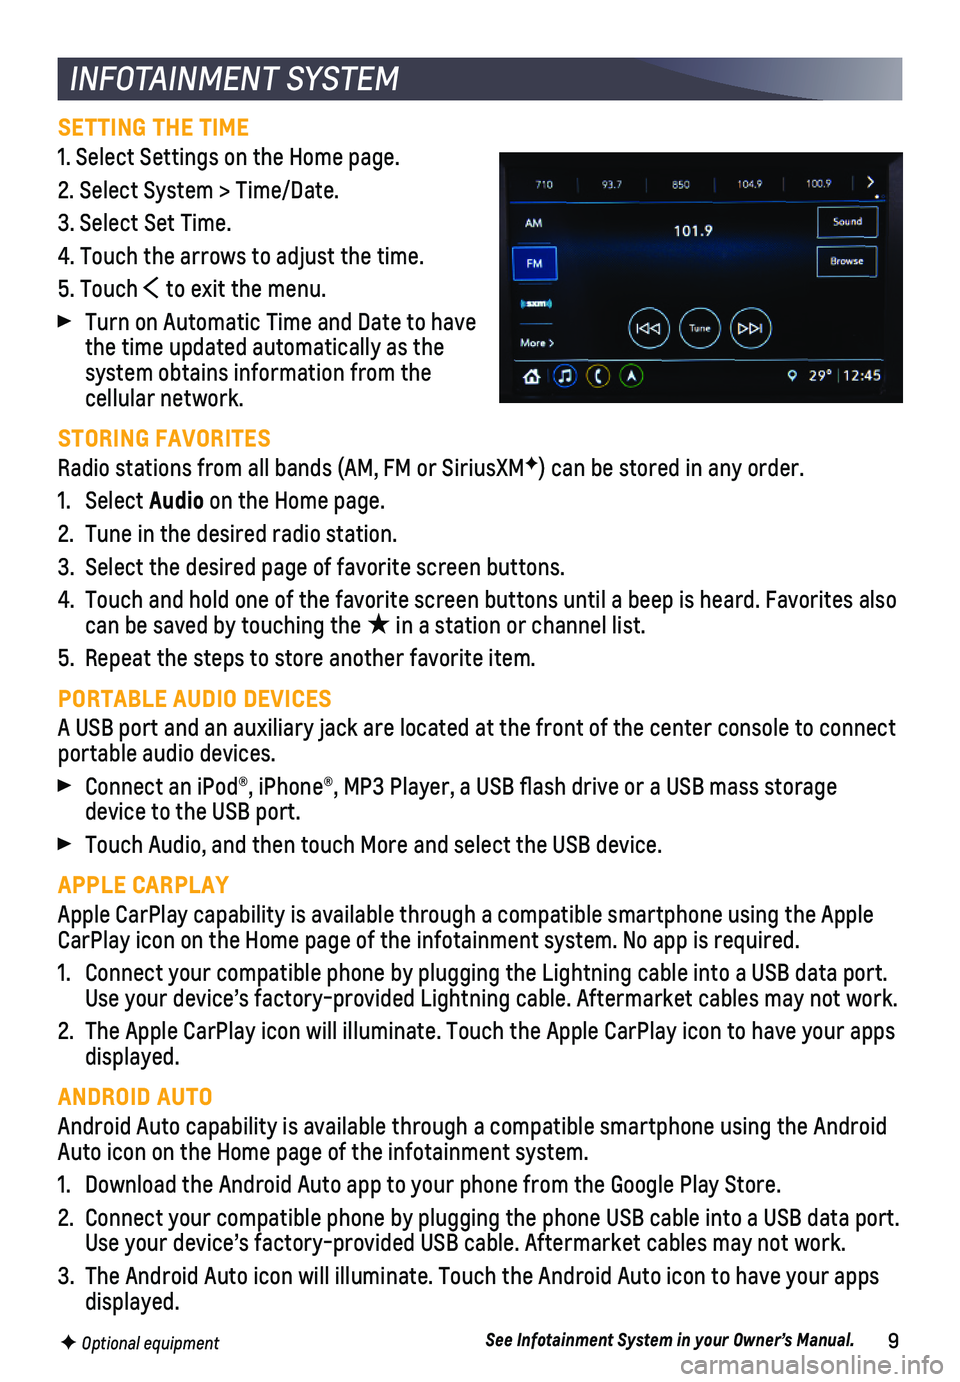 CHEVROLET SONIC 2019  Get To Know Guide 9F Optional equipment
INFOTAINMENT SYSTEM
SETTING THE TIME
1. Select Settings on the Home page. 
2. Select System > Time/Date.
3. Select Set Time.
4. Touch the arrows to adjust the time.
5. Touch  to 